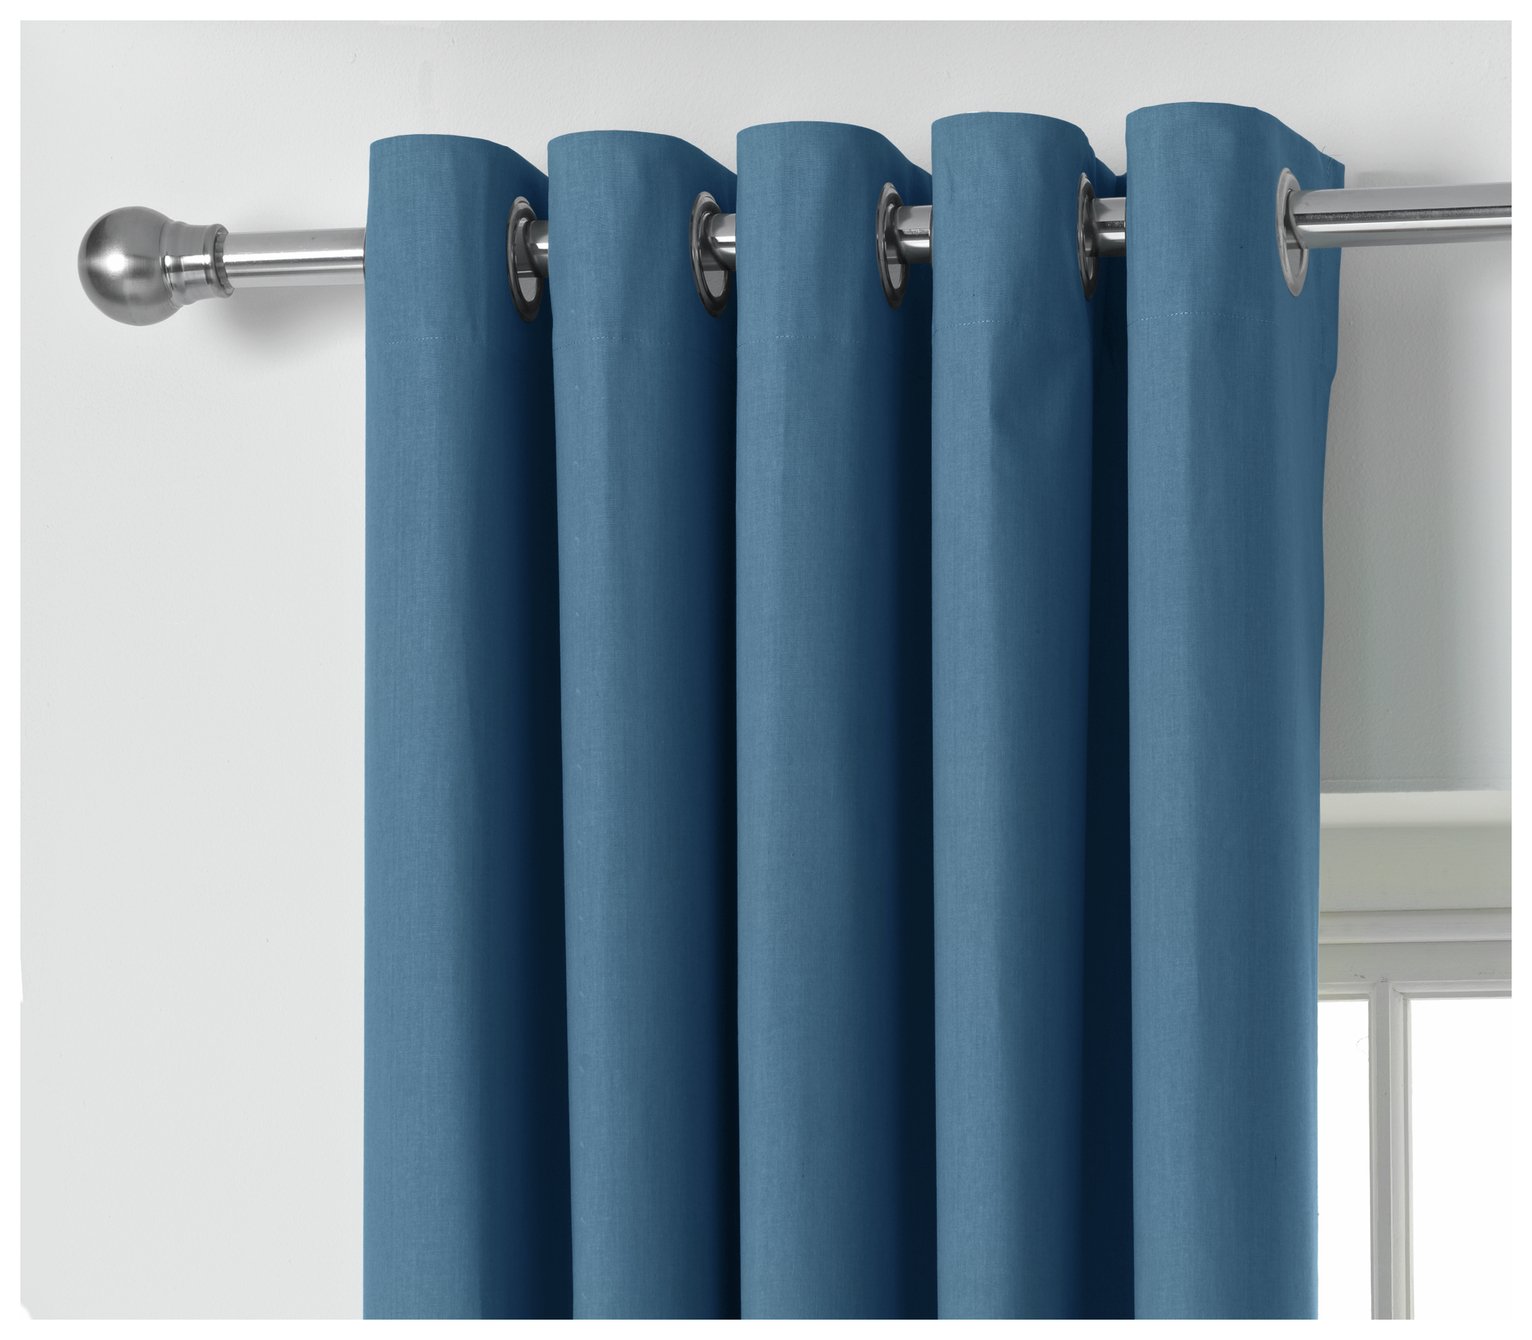 ColourMatch Thermal Blackout Curtains - 117x137cm - Navy